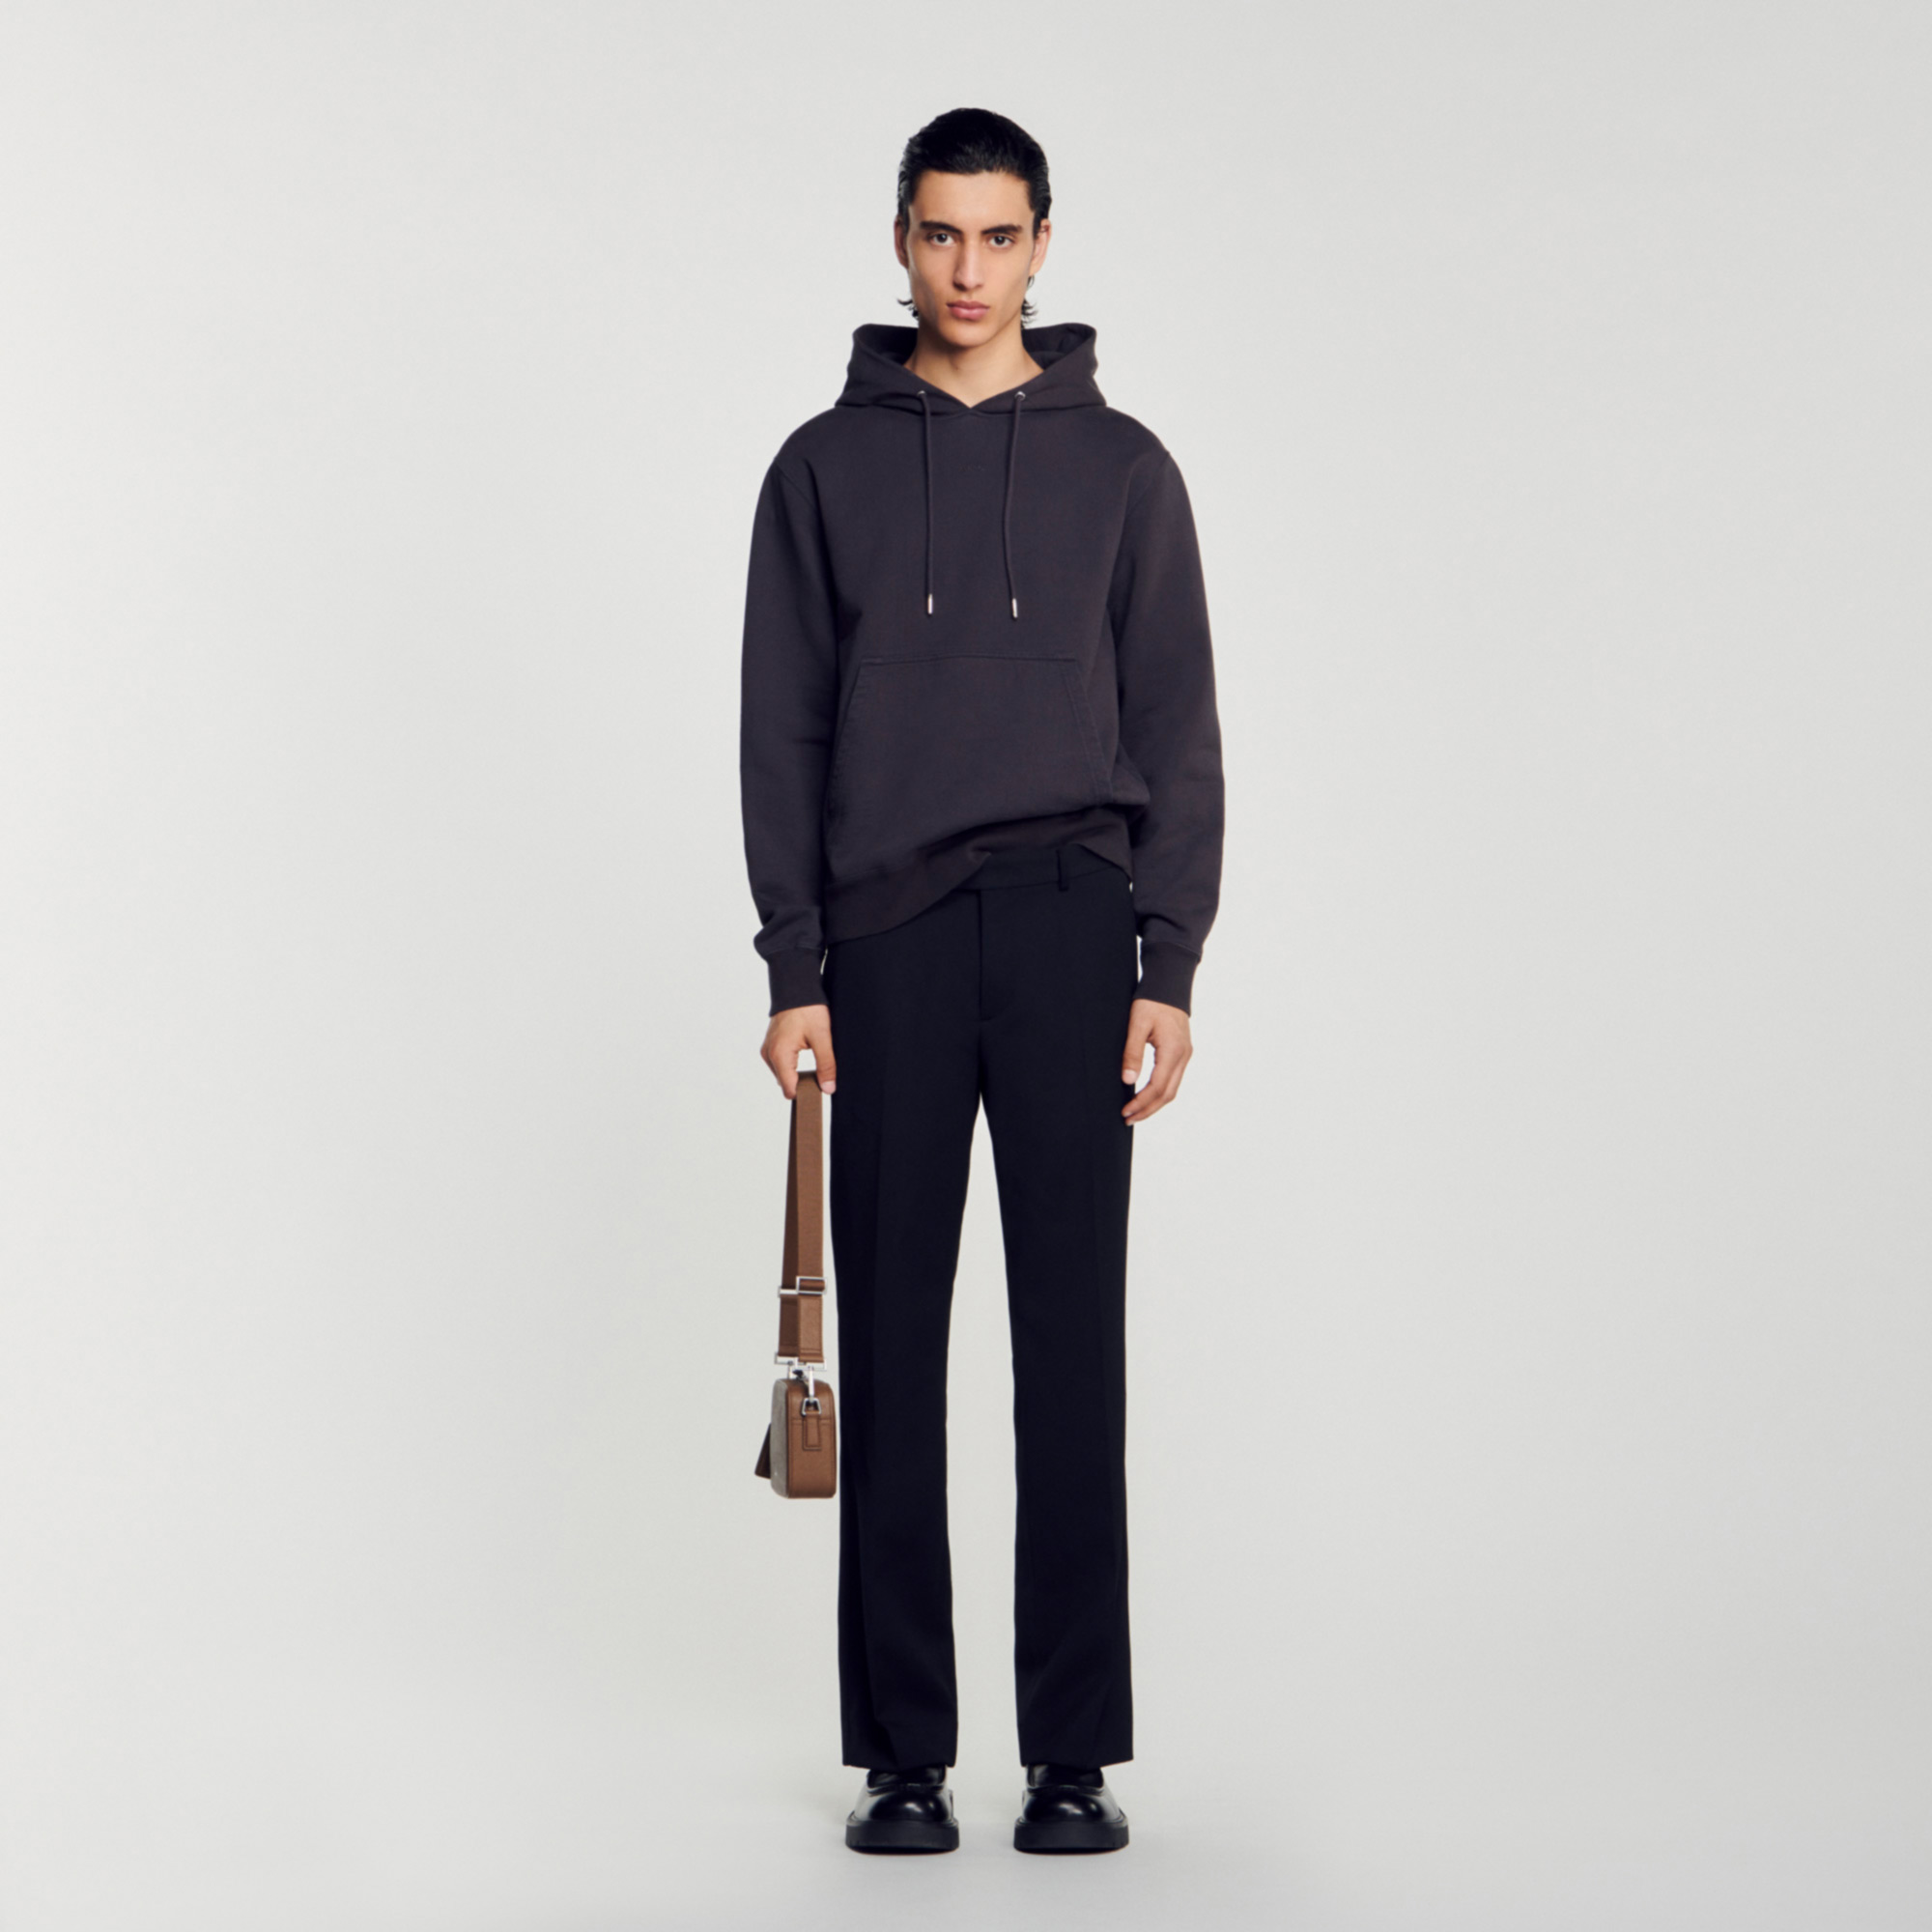 Sandro cotton Rib: Unbrushed fleece sweater with a hood, long sleeves, a front pocket, and Sandro embroidery